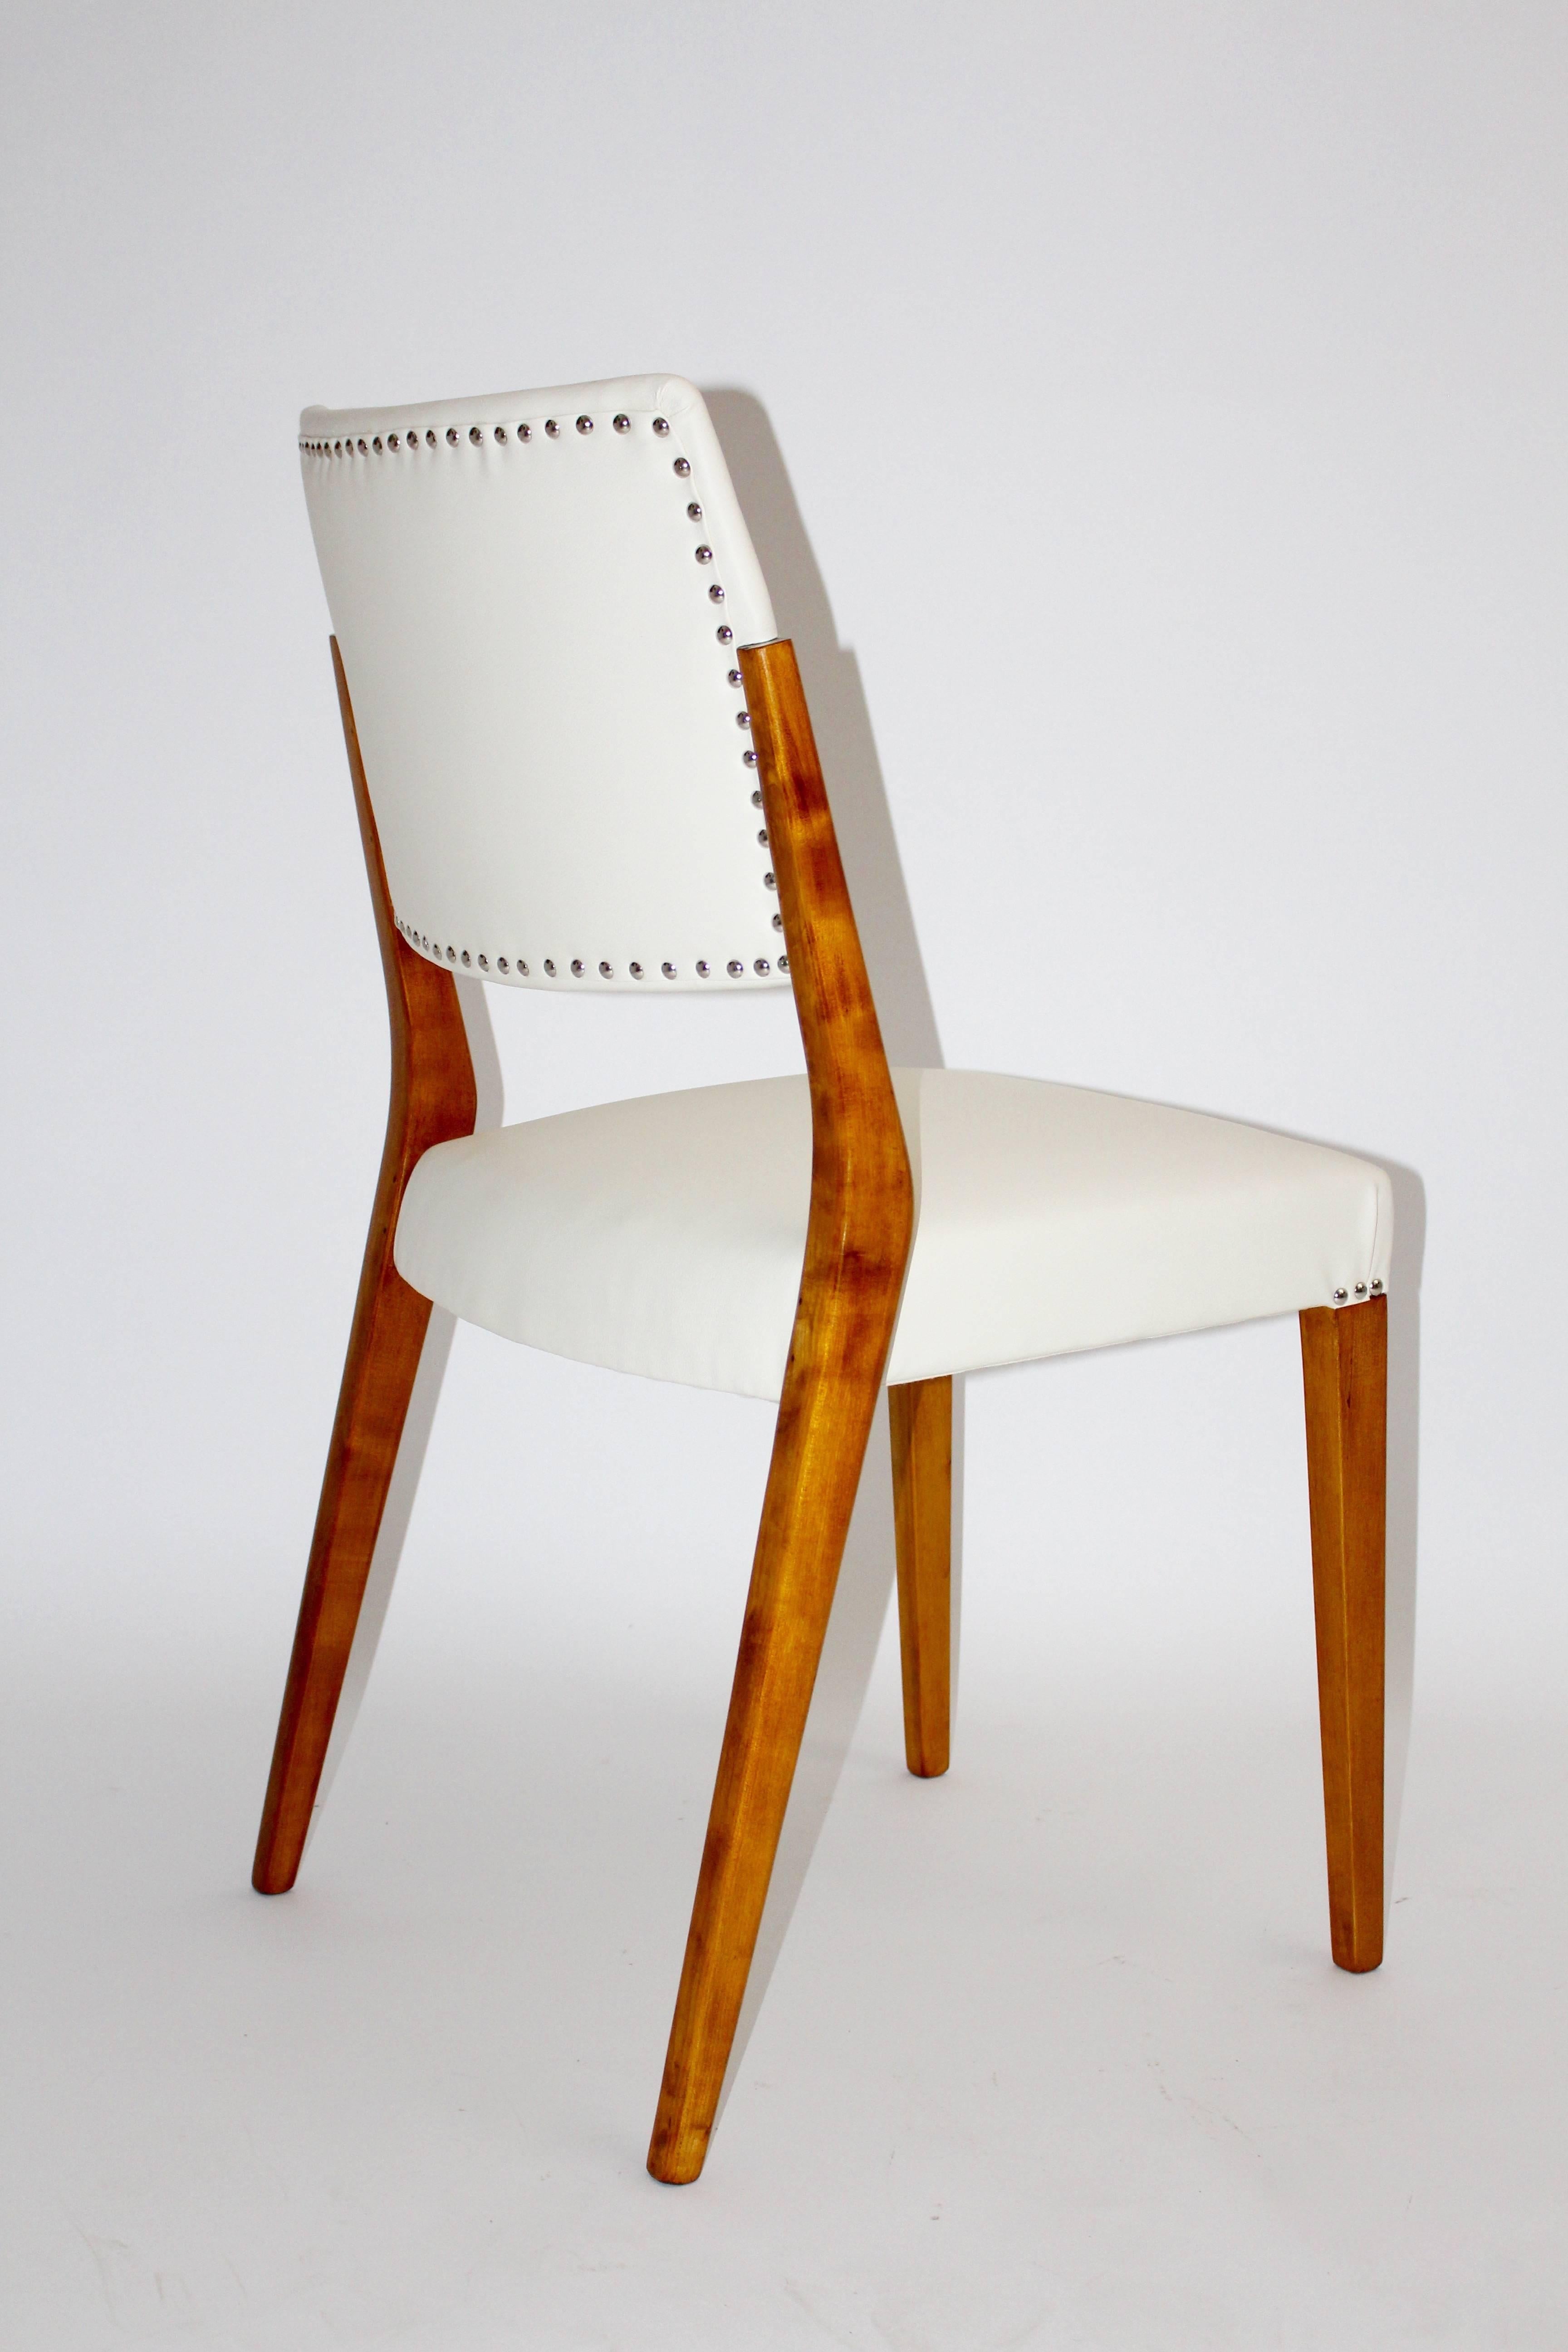 Mid Century Modern vintage chair or side chair, which was designed by the Austrian Architect Karl Schwanzer (1918-1975) and produced by Thonet Mundus (labeled).
This beautiful chair shows a frame from hand-polished maple tree, while the seat and